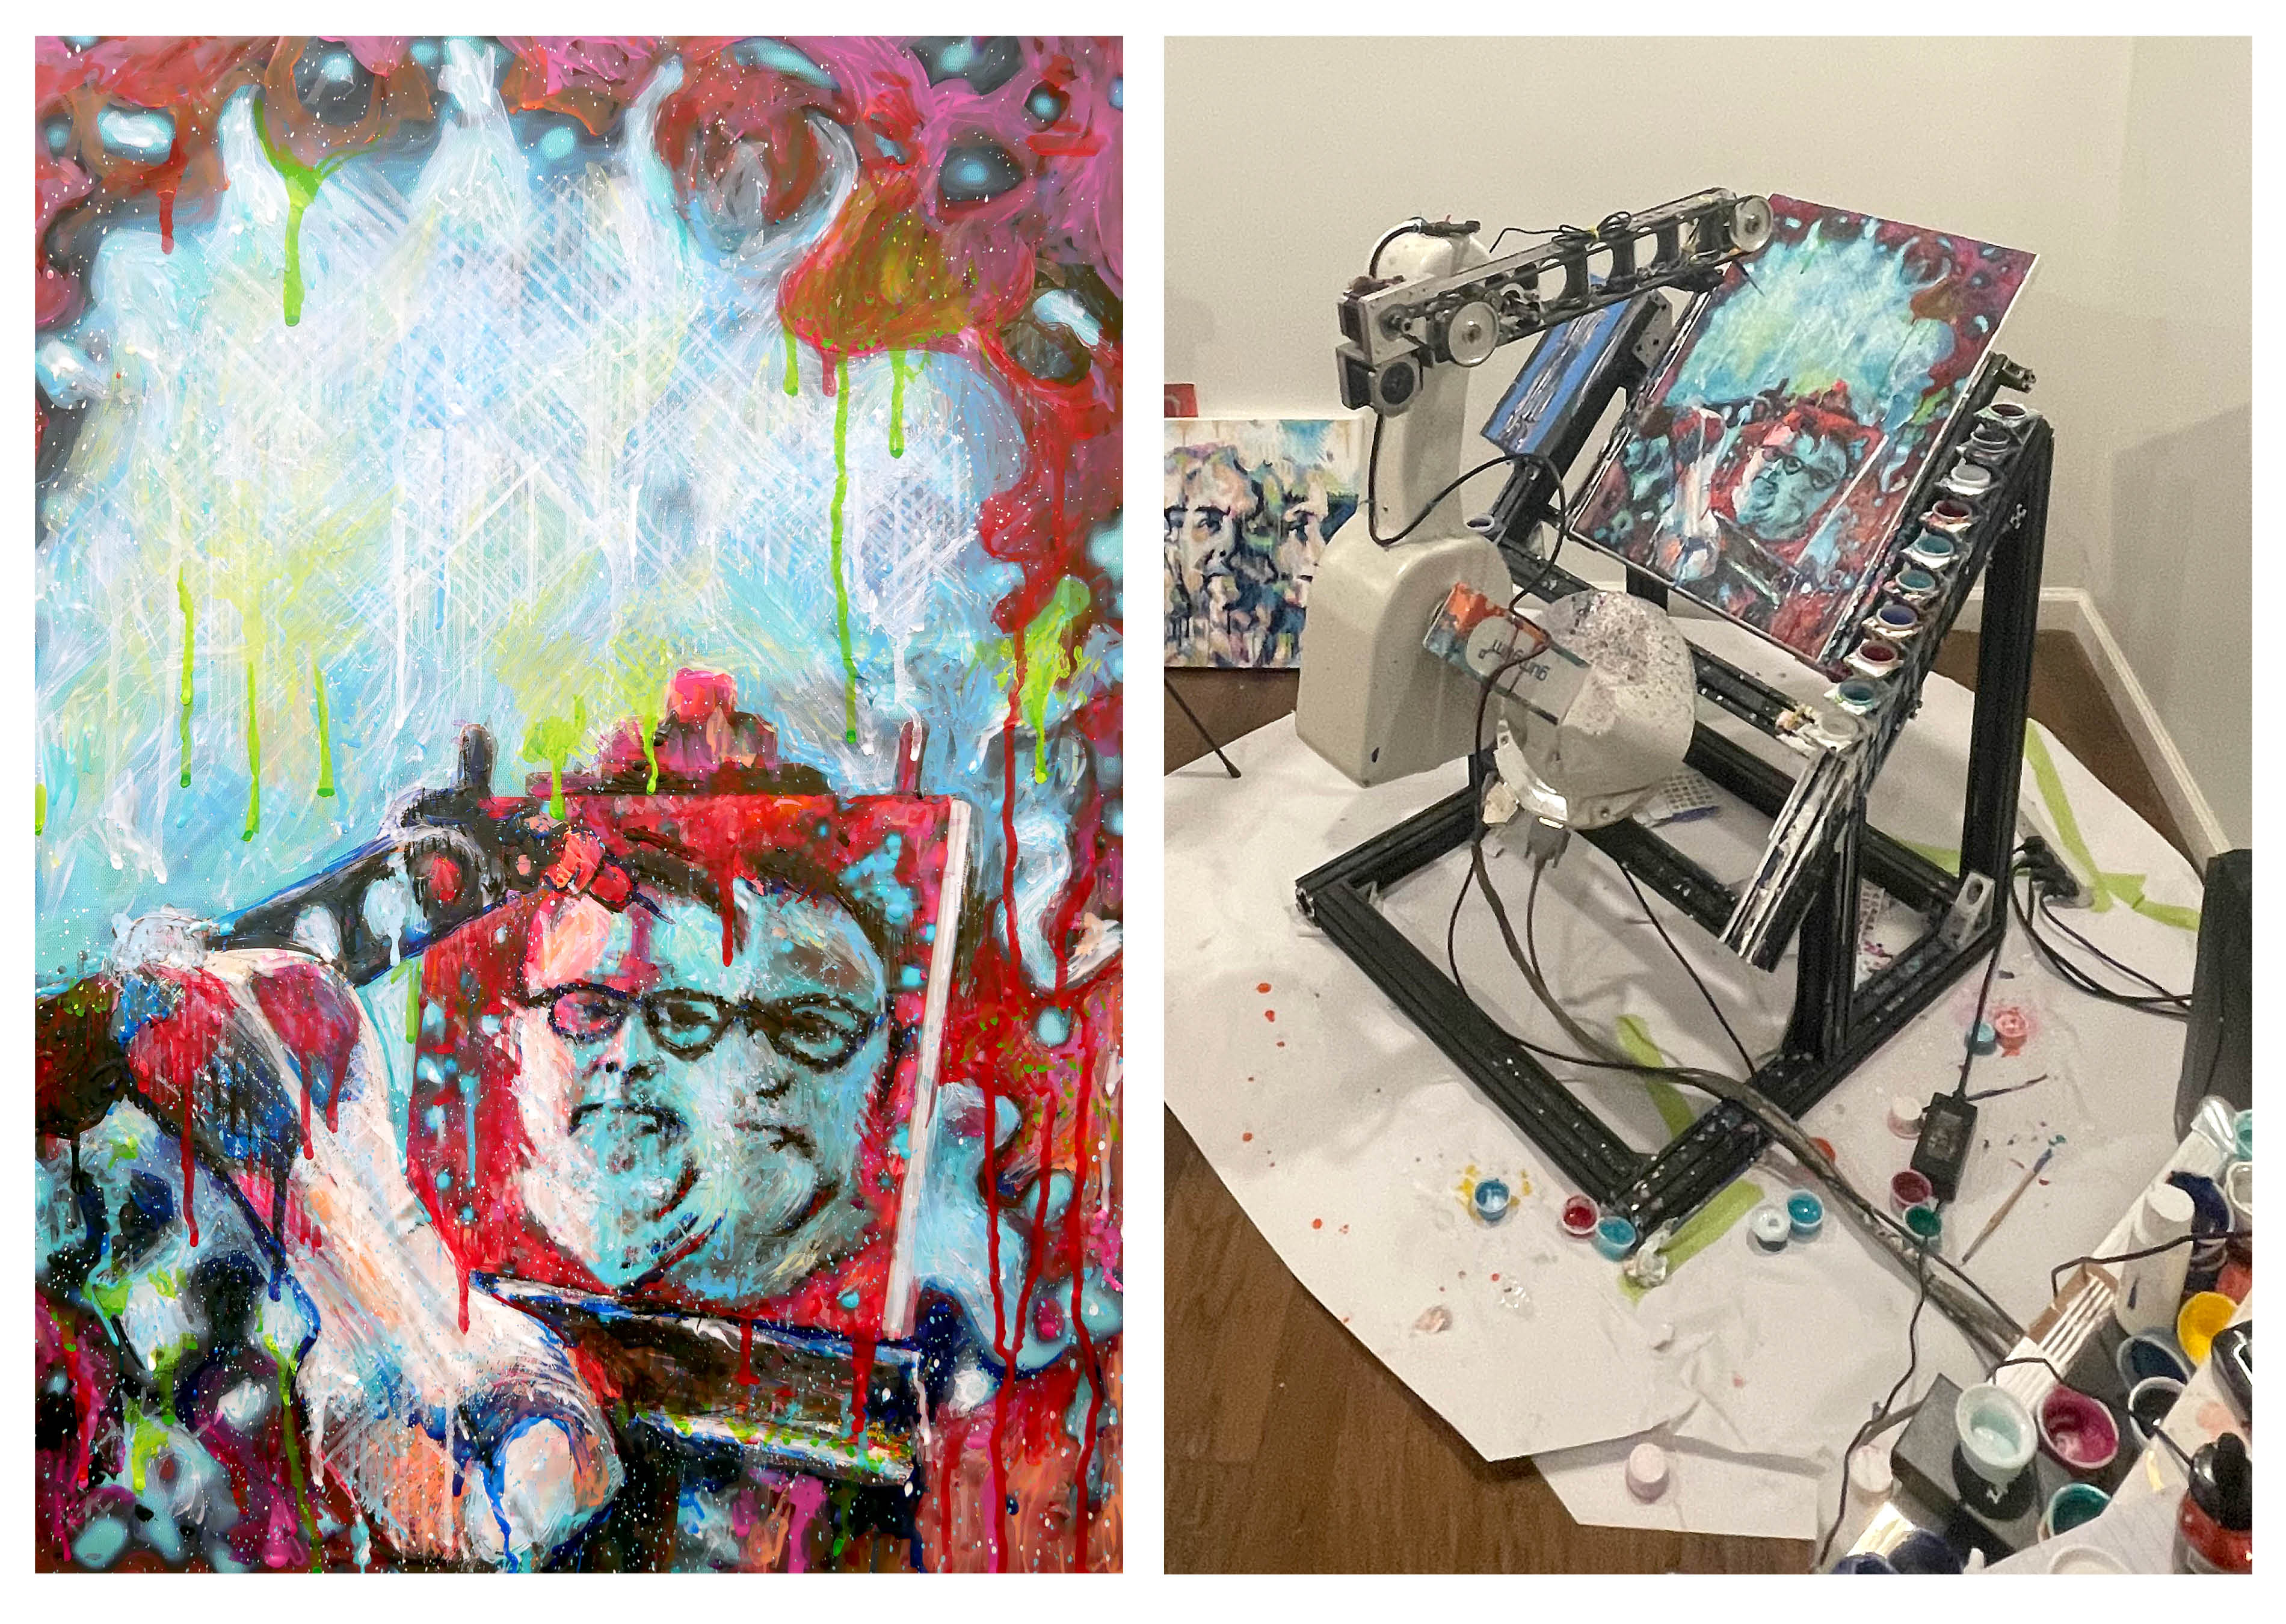 Pindar Van Arman and his robot's self-portrait (L), and a behind-the-scenes snapshot (R) (Artwork by Pindar Van Arman and his AI robot)